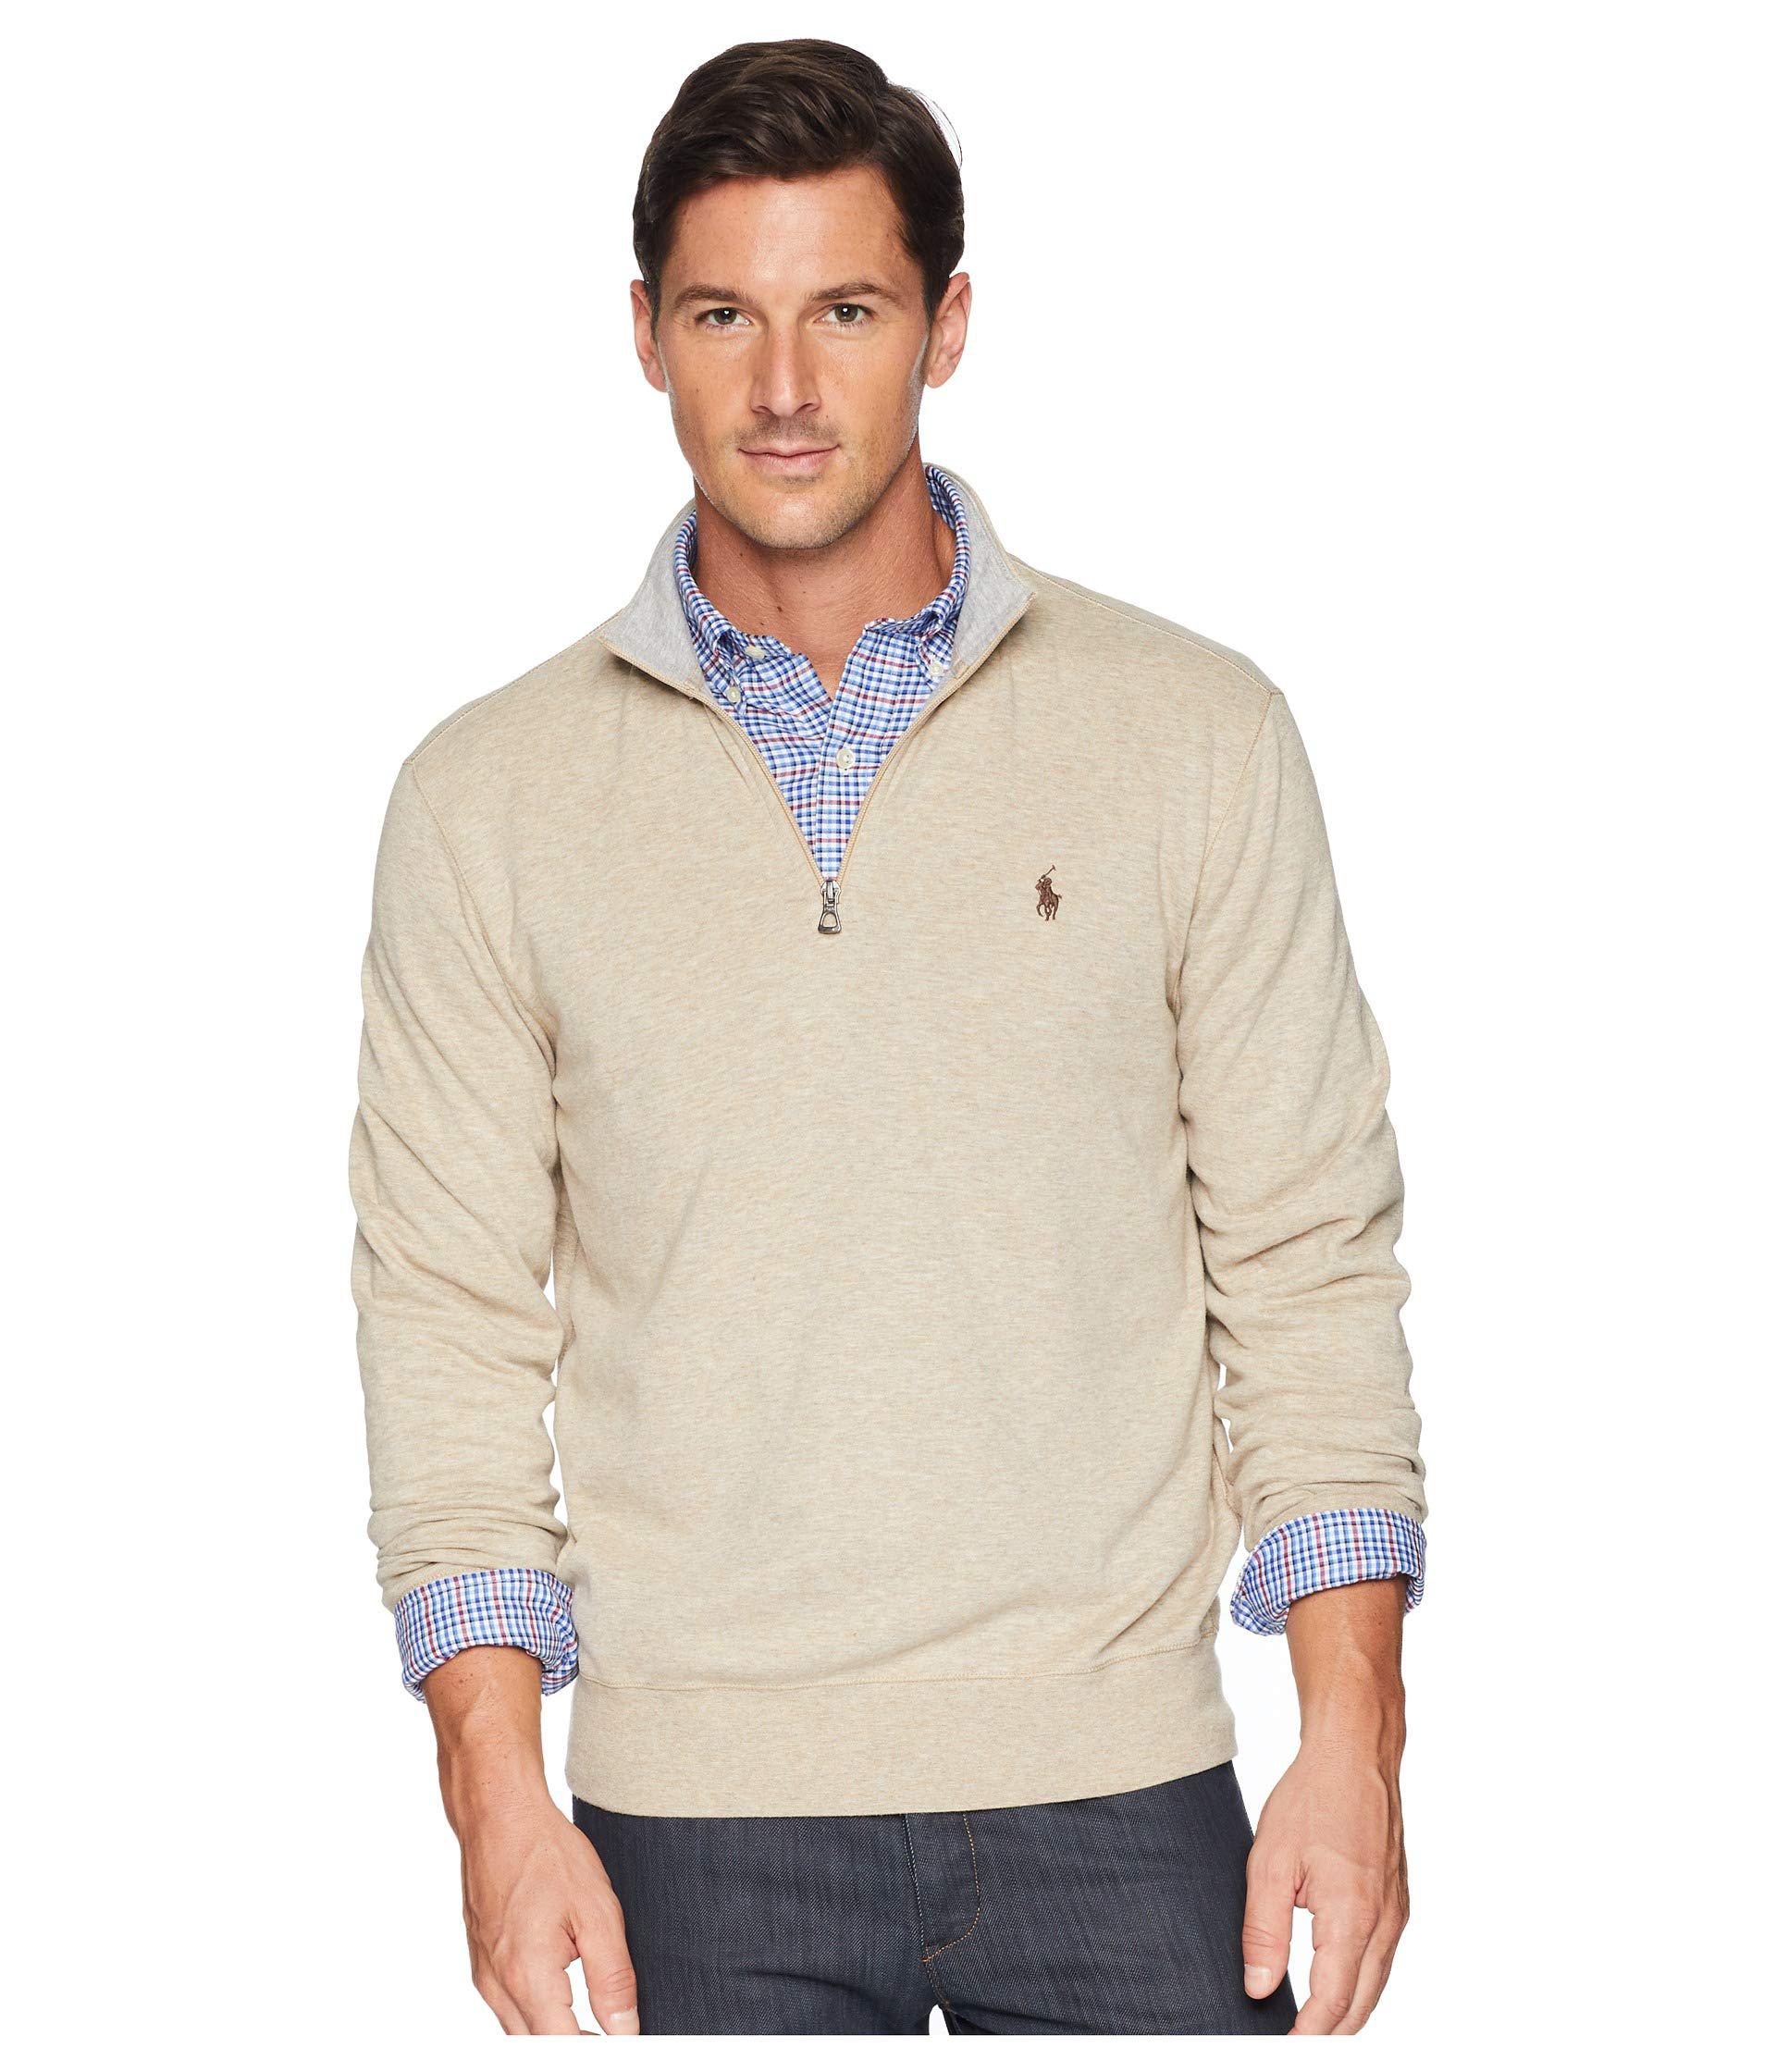 Polo Ralph Lauren Cotton Double Knit Pullover in Natural for Men - Lyst